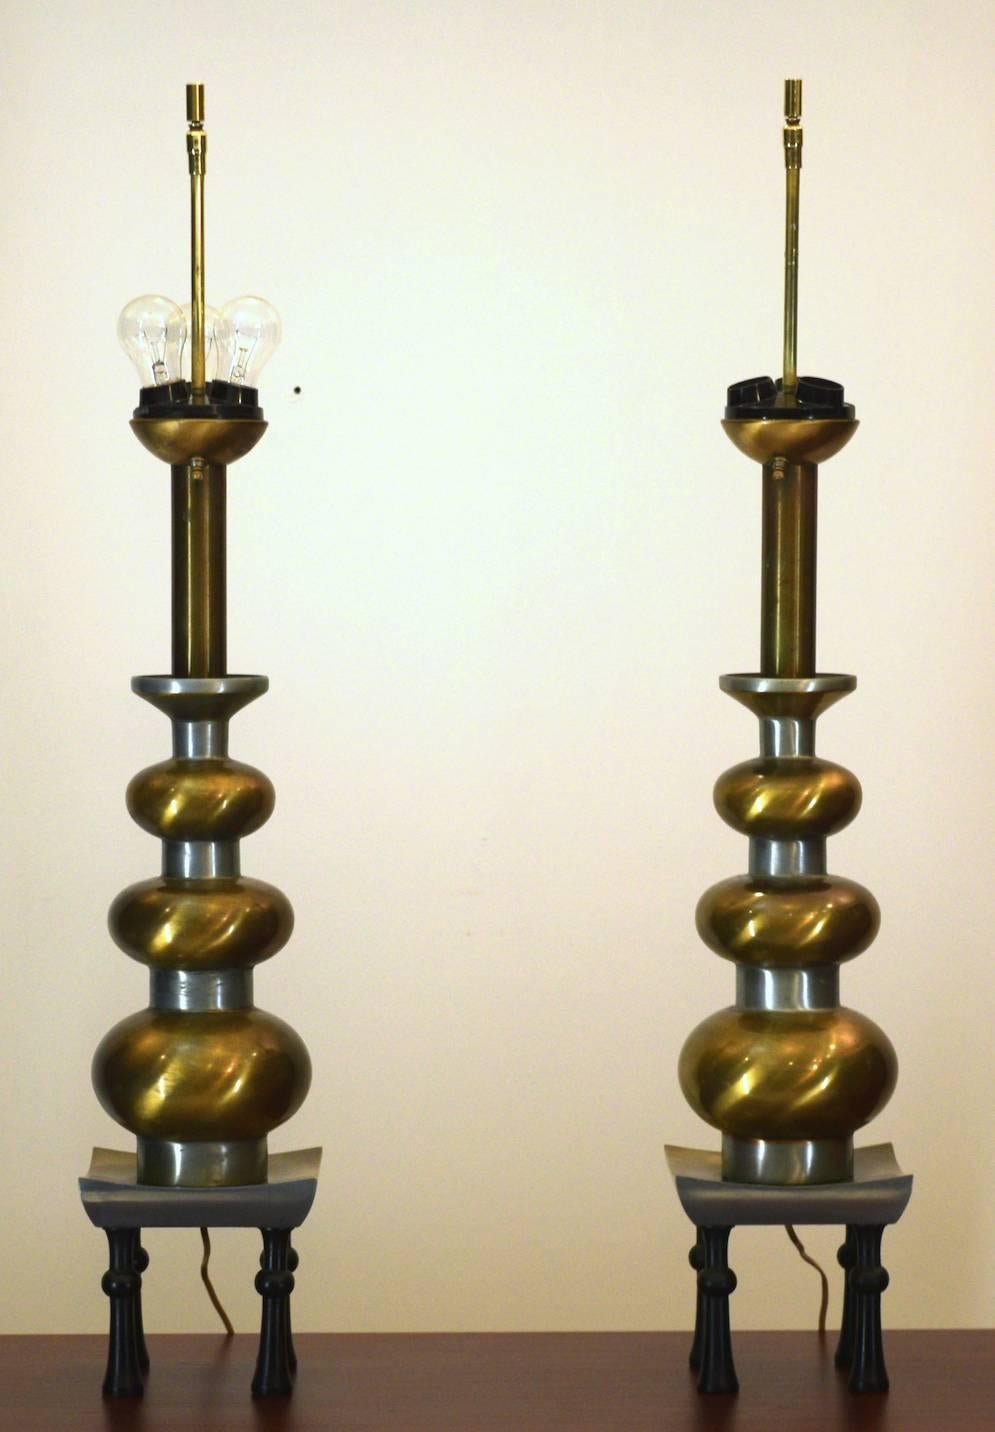 Presented here is a unique pair of table lamps by Westwood Studios from the late 1950s period. They are unique and likely a one-off pair produced by the company. 

Measures 6.5